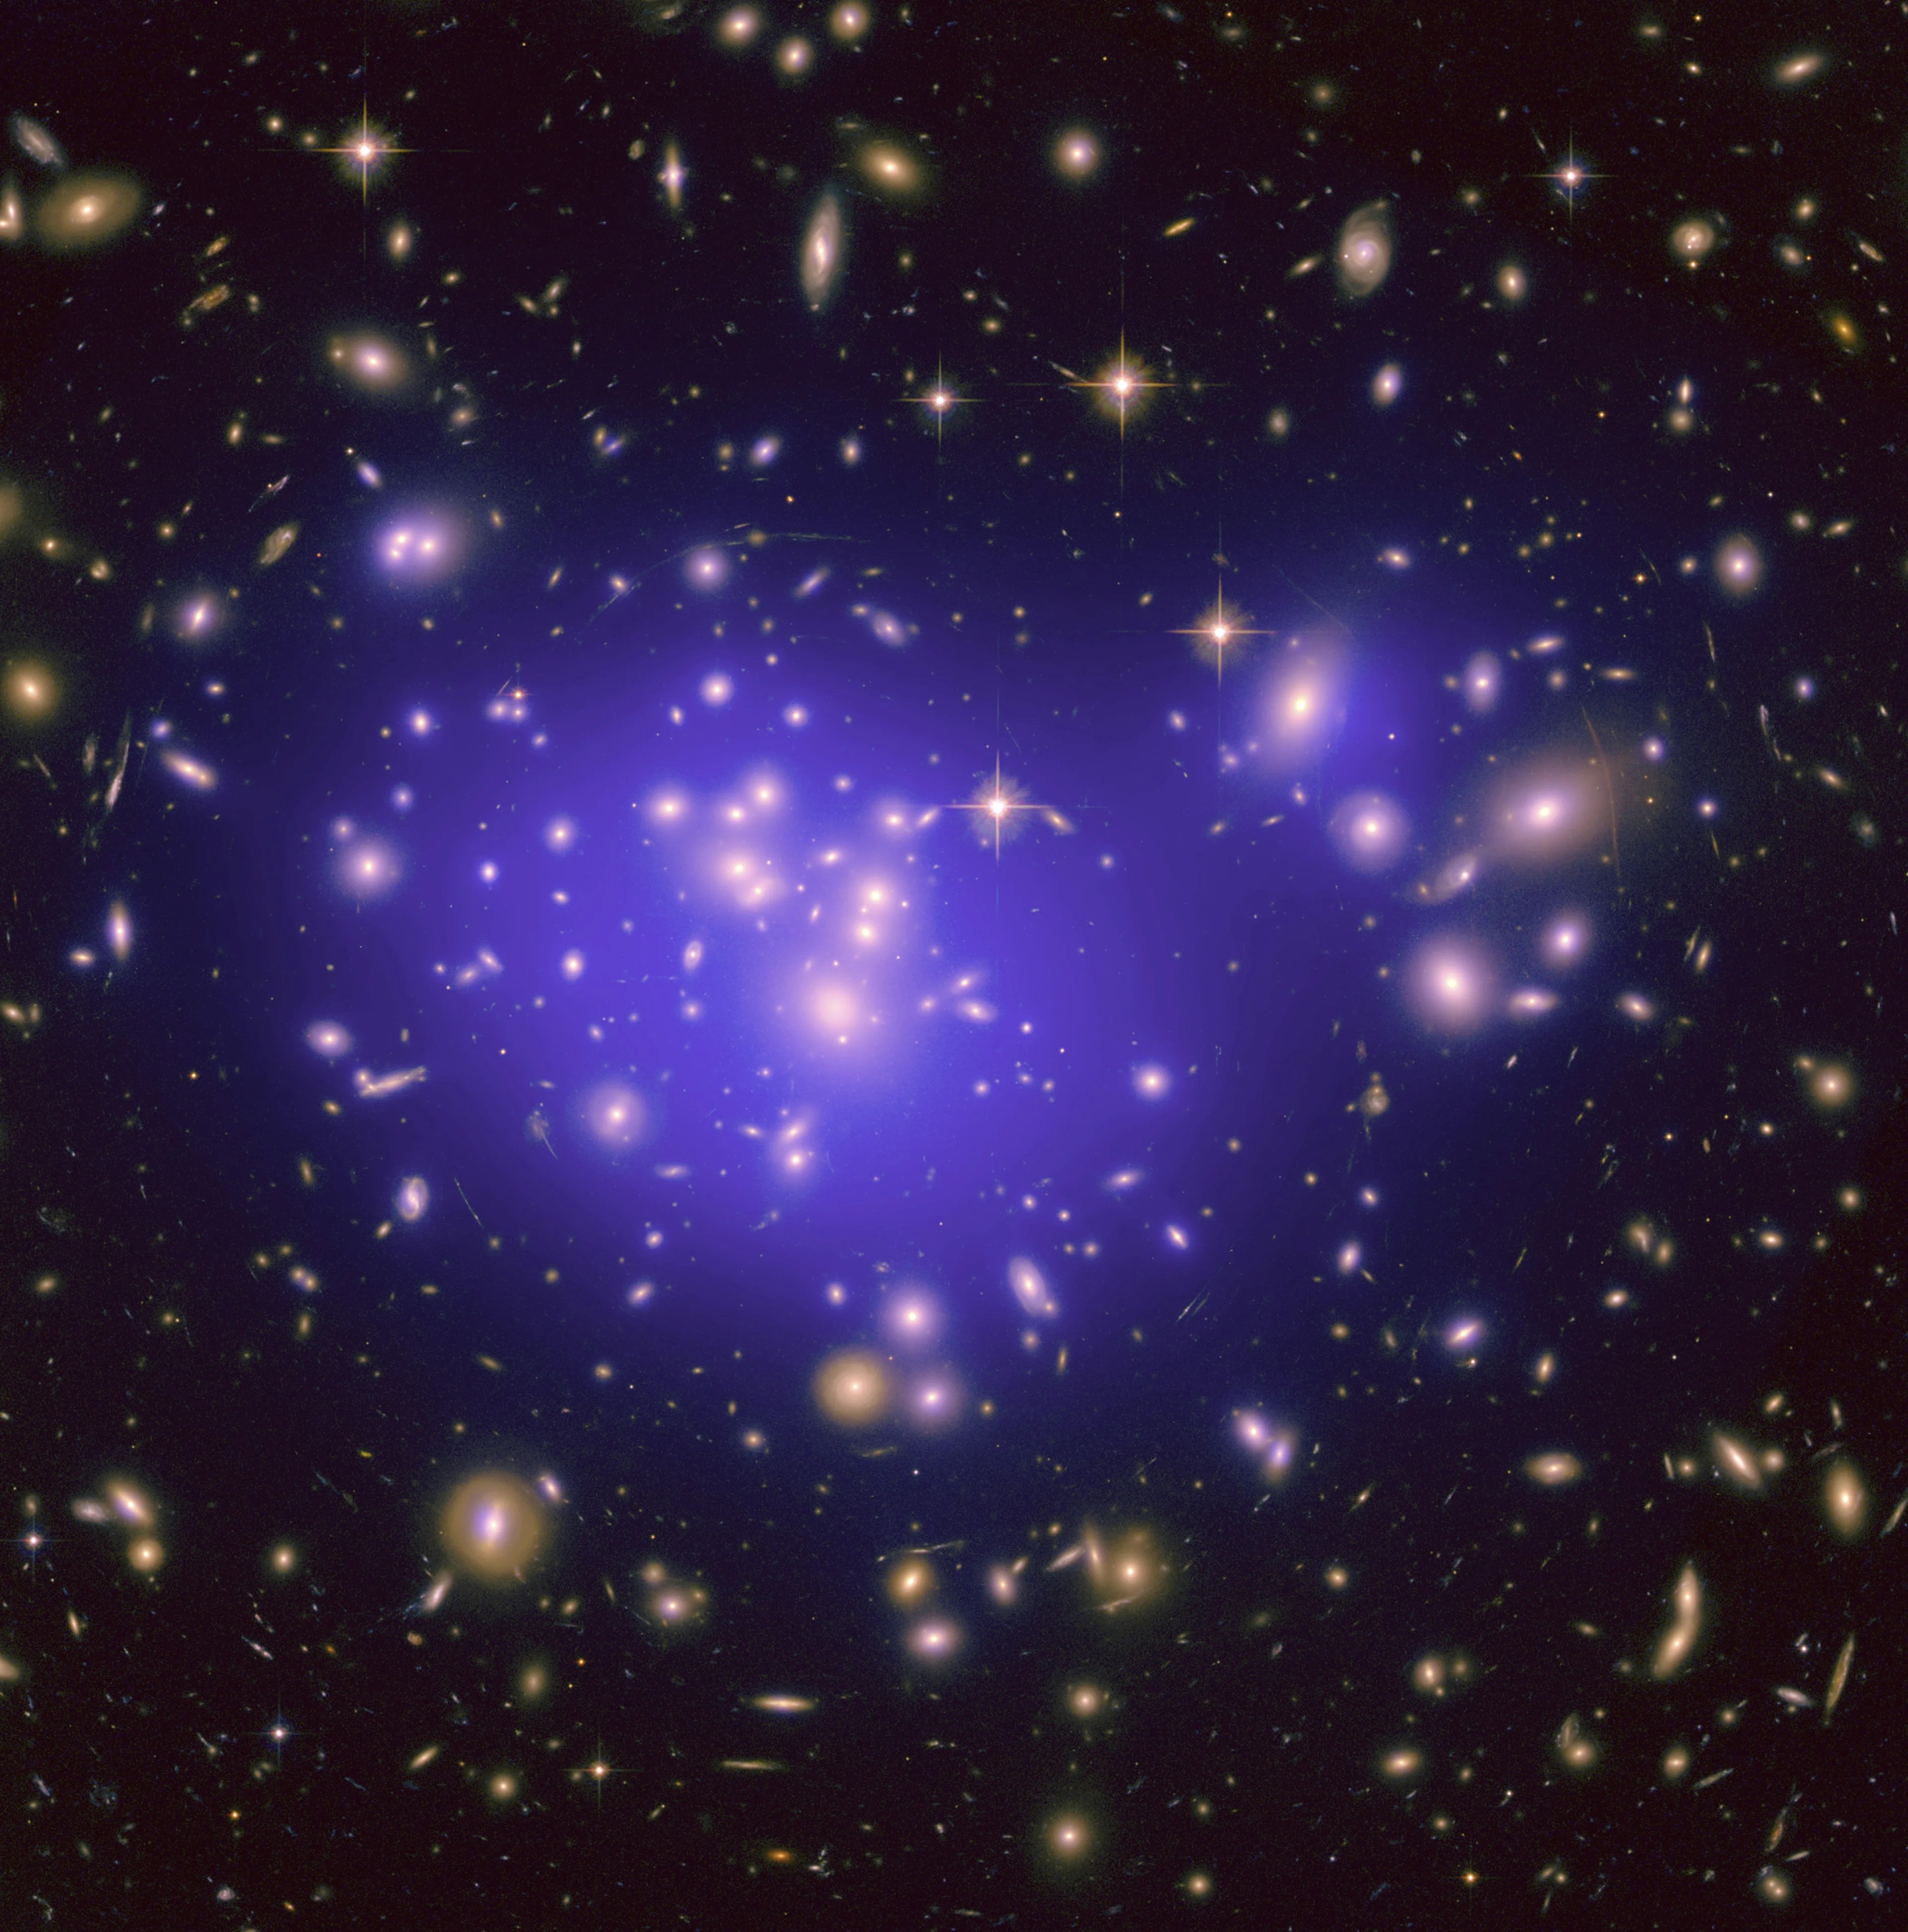 A cluster of galaxies fills the frame. A purple glow around the largest concentrations of galaxies indicates the distribution of dark matter.